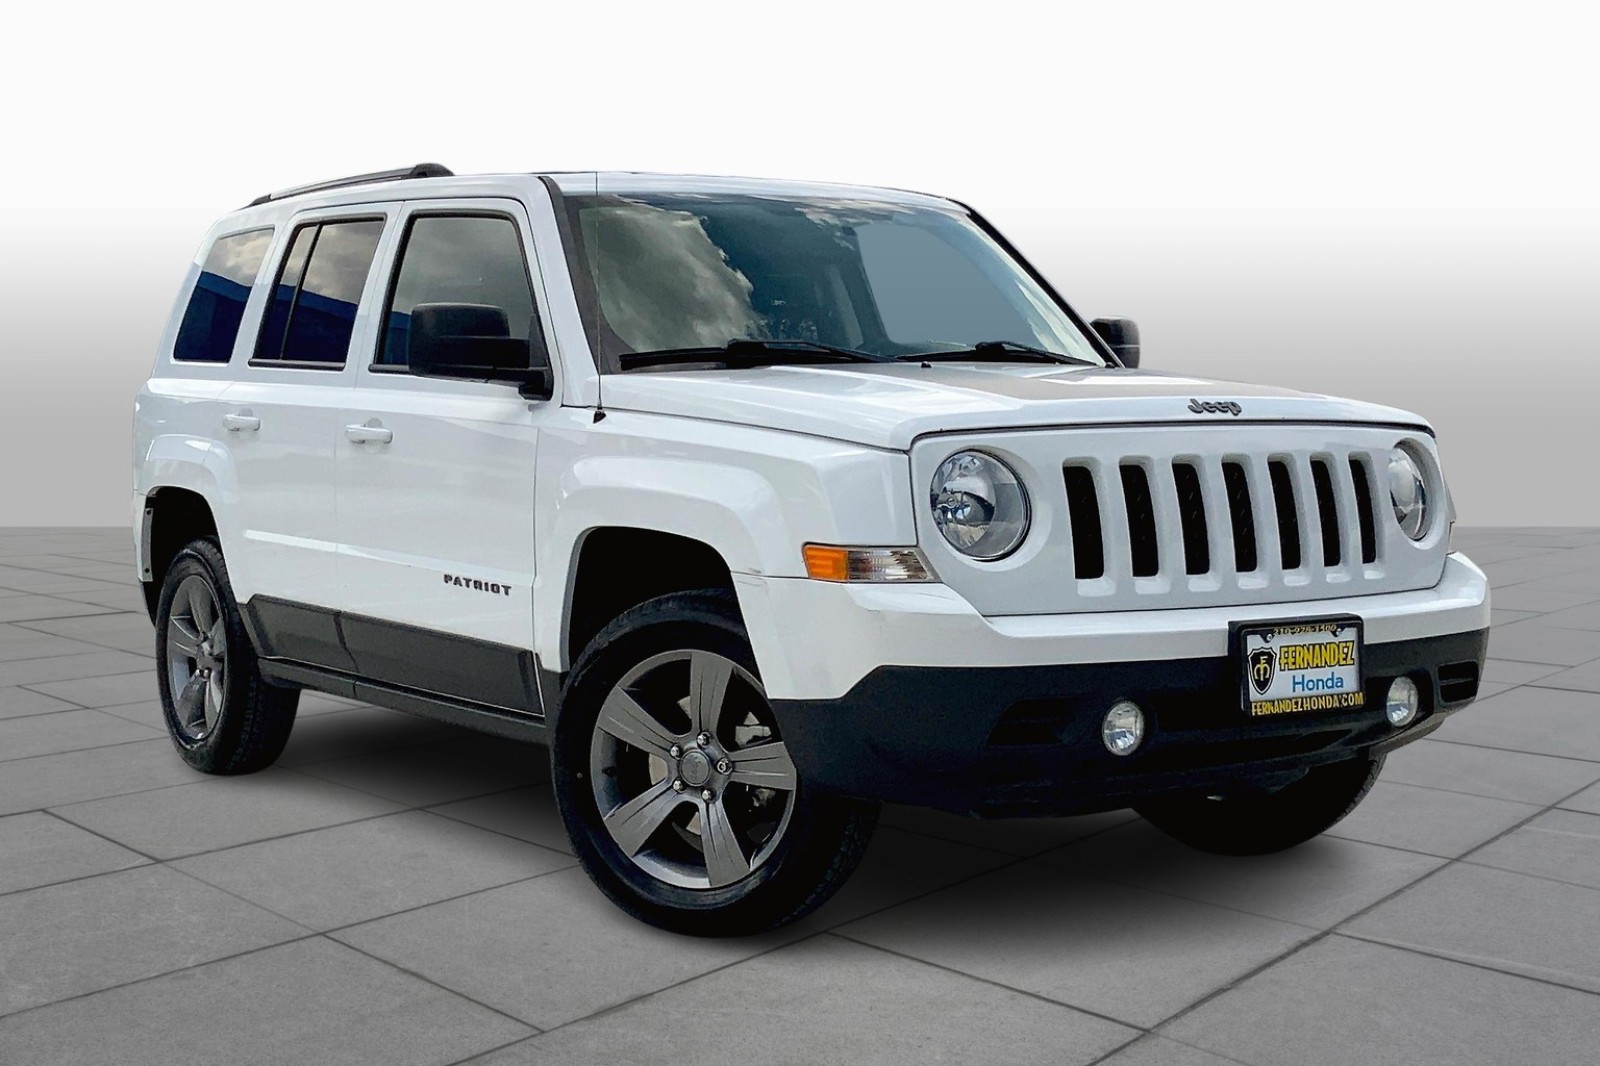 Pre-Owned 2016 Jeep Patriot Sport FWD SUV in San Antonio #GD788441 |  Volkswagen of Alamo Heights